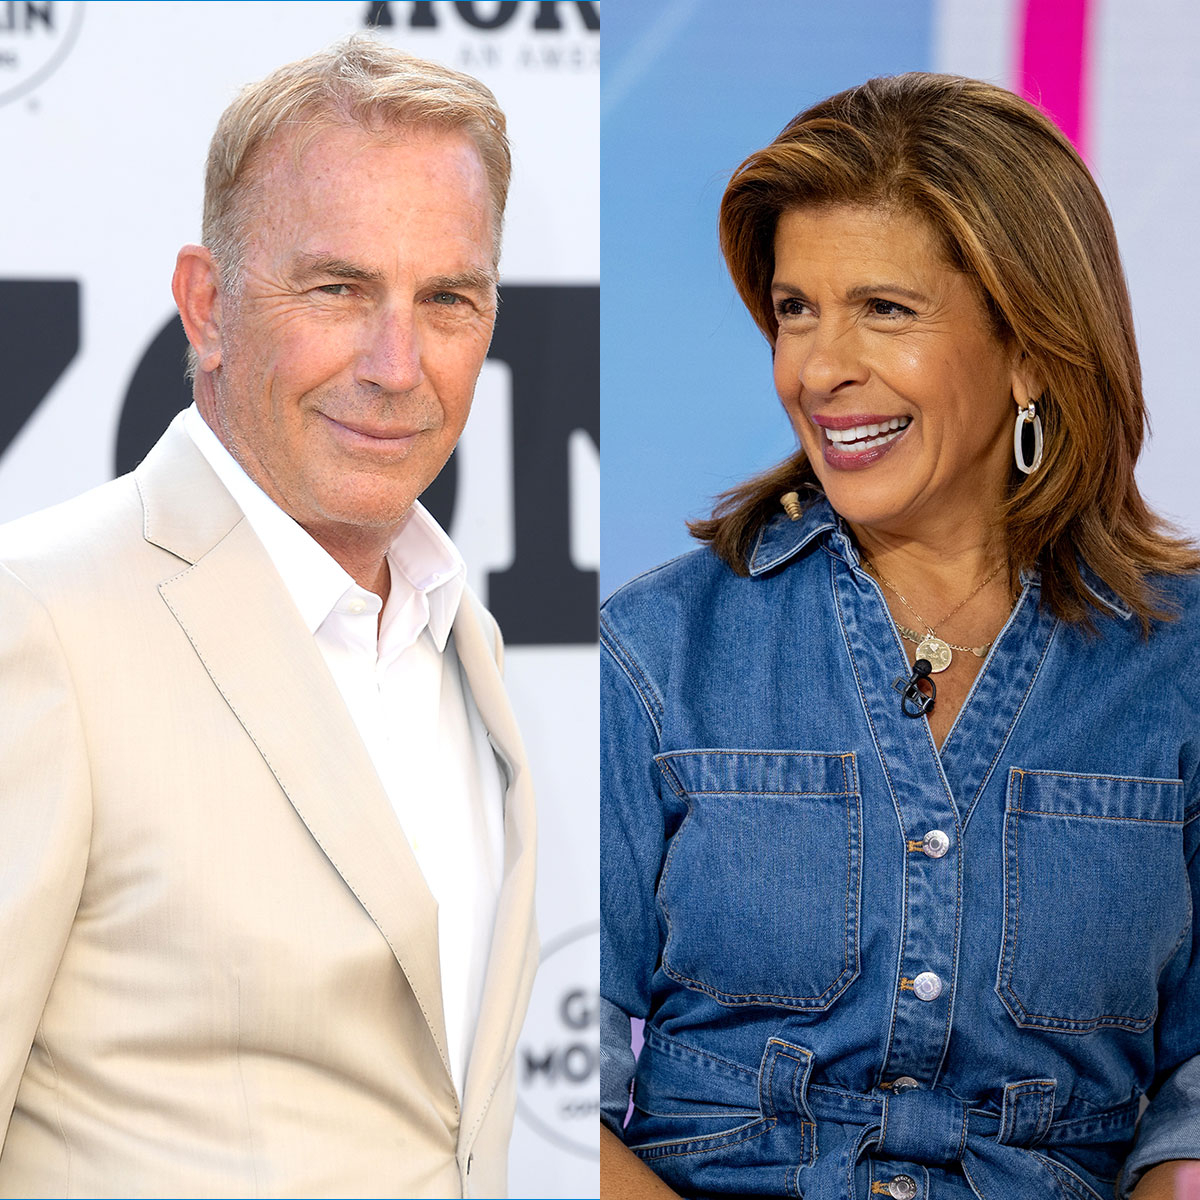 Hoda Kotb Reacts to Fans Wanting Her to Date Kevin Costner